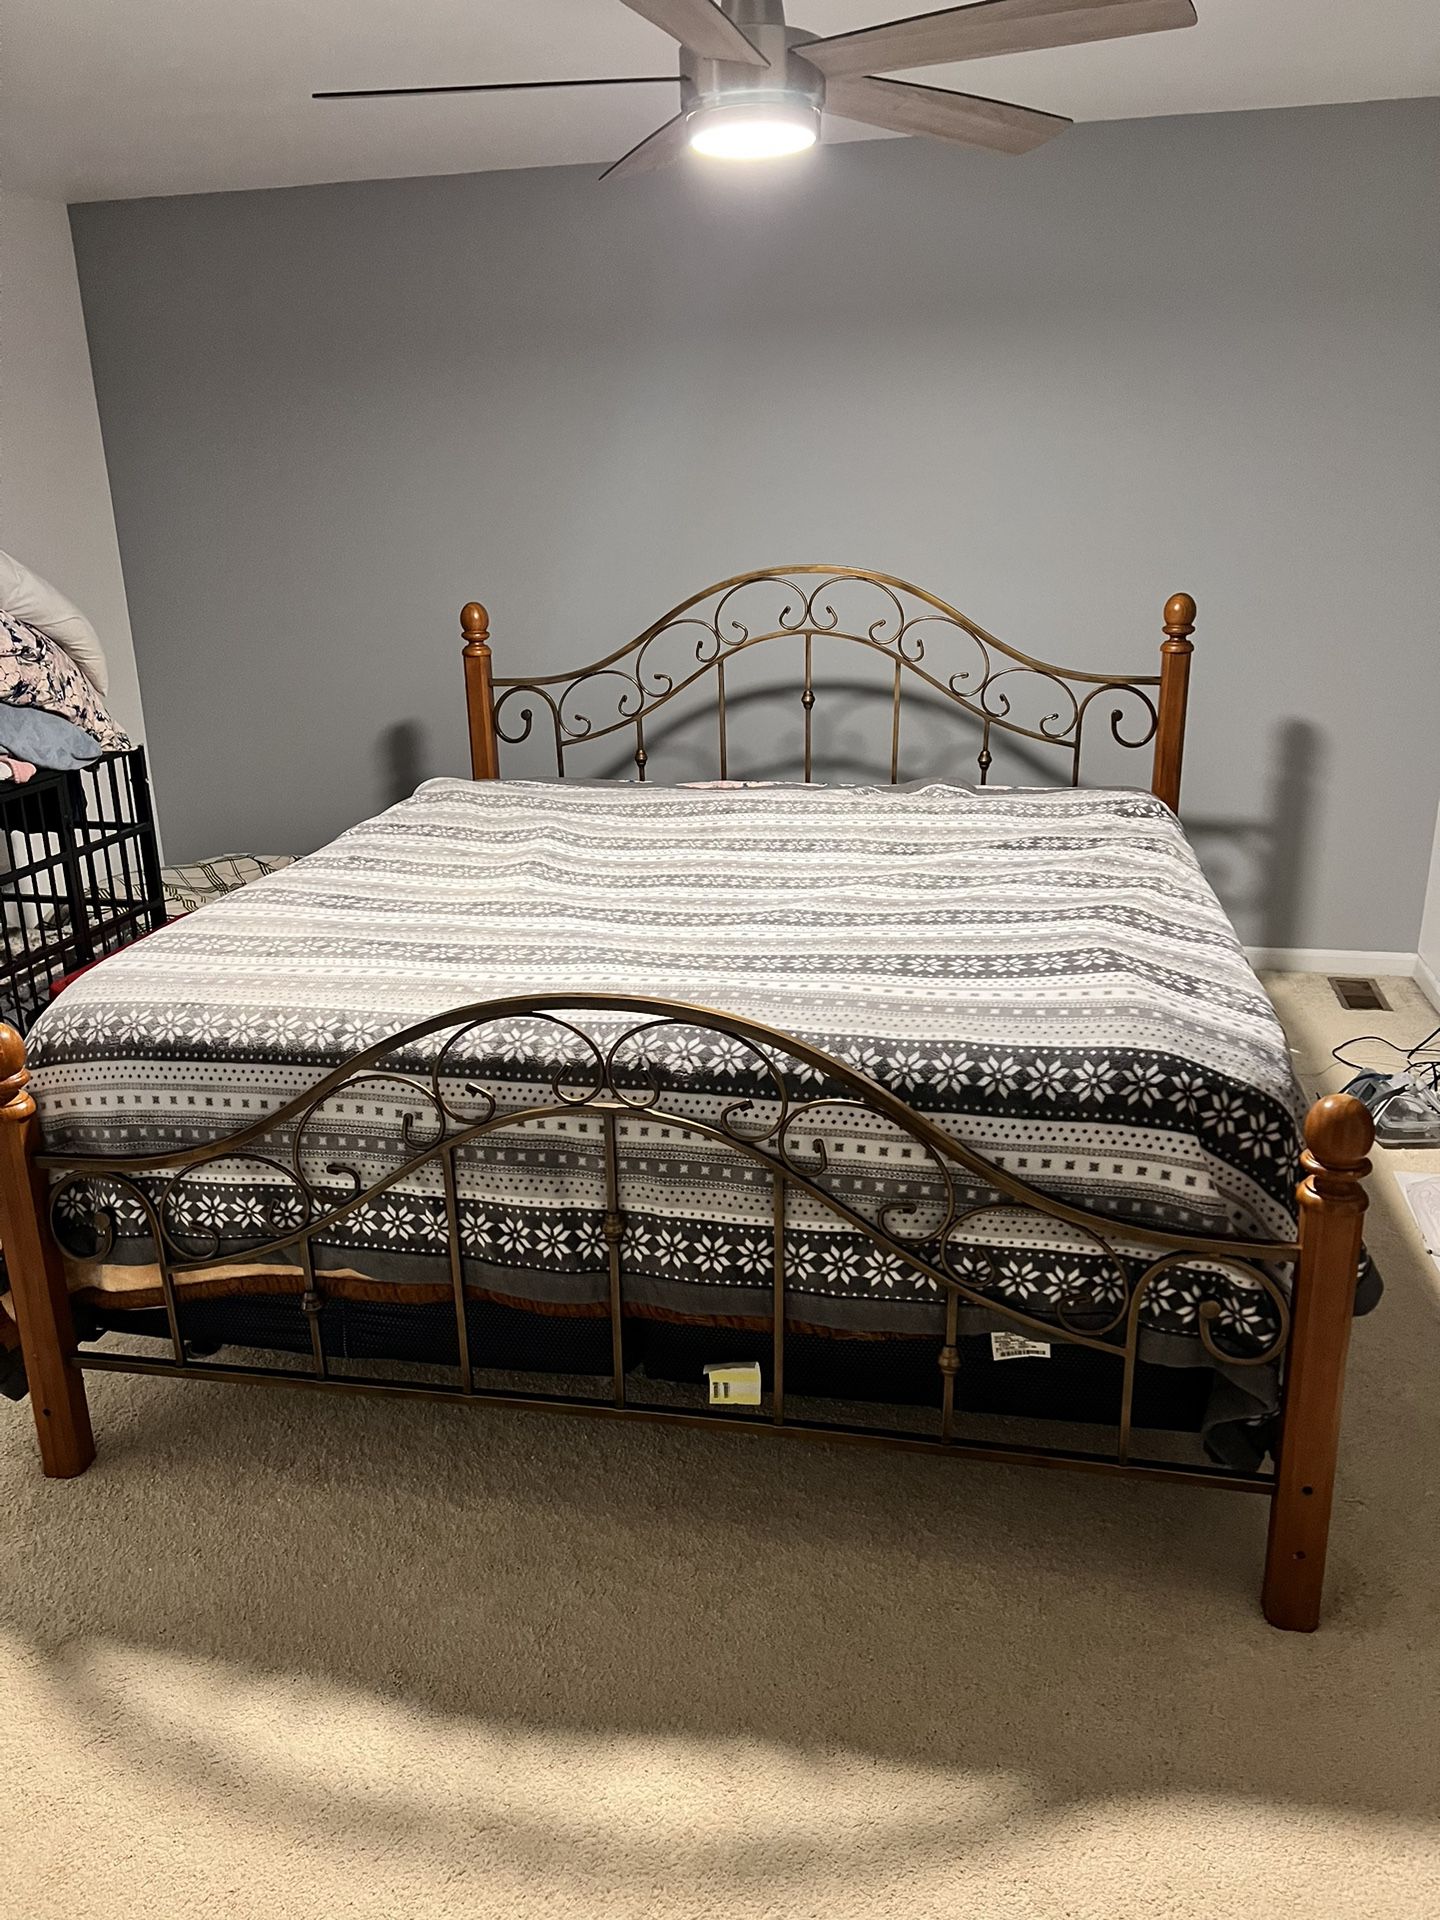 King Headboard, Footboard,  And Frame ONLY